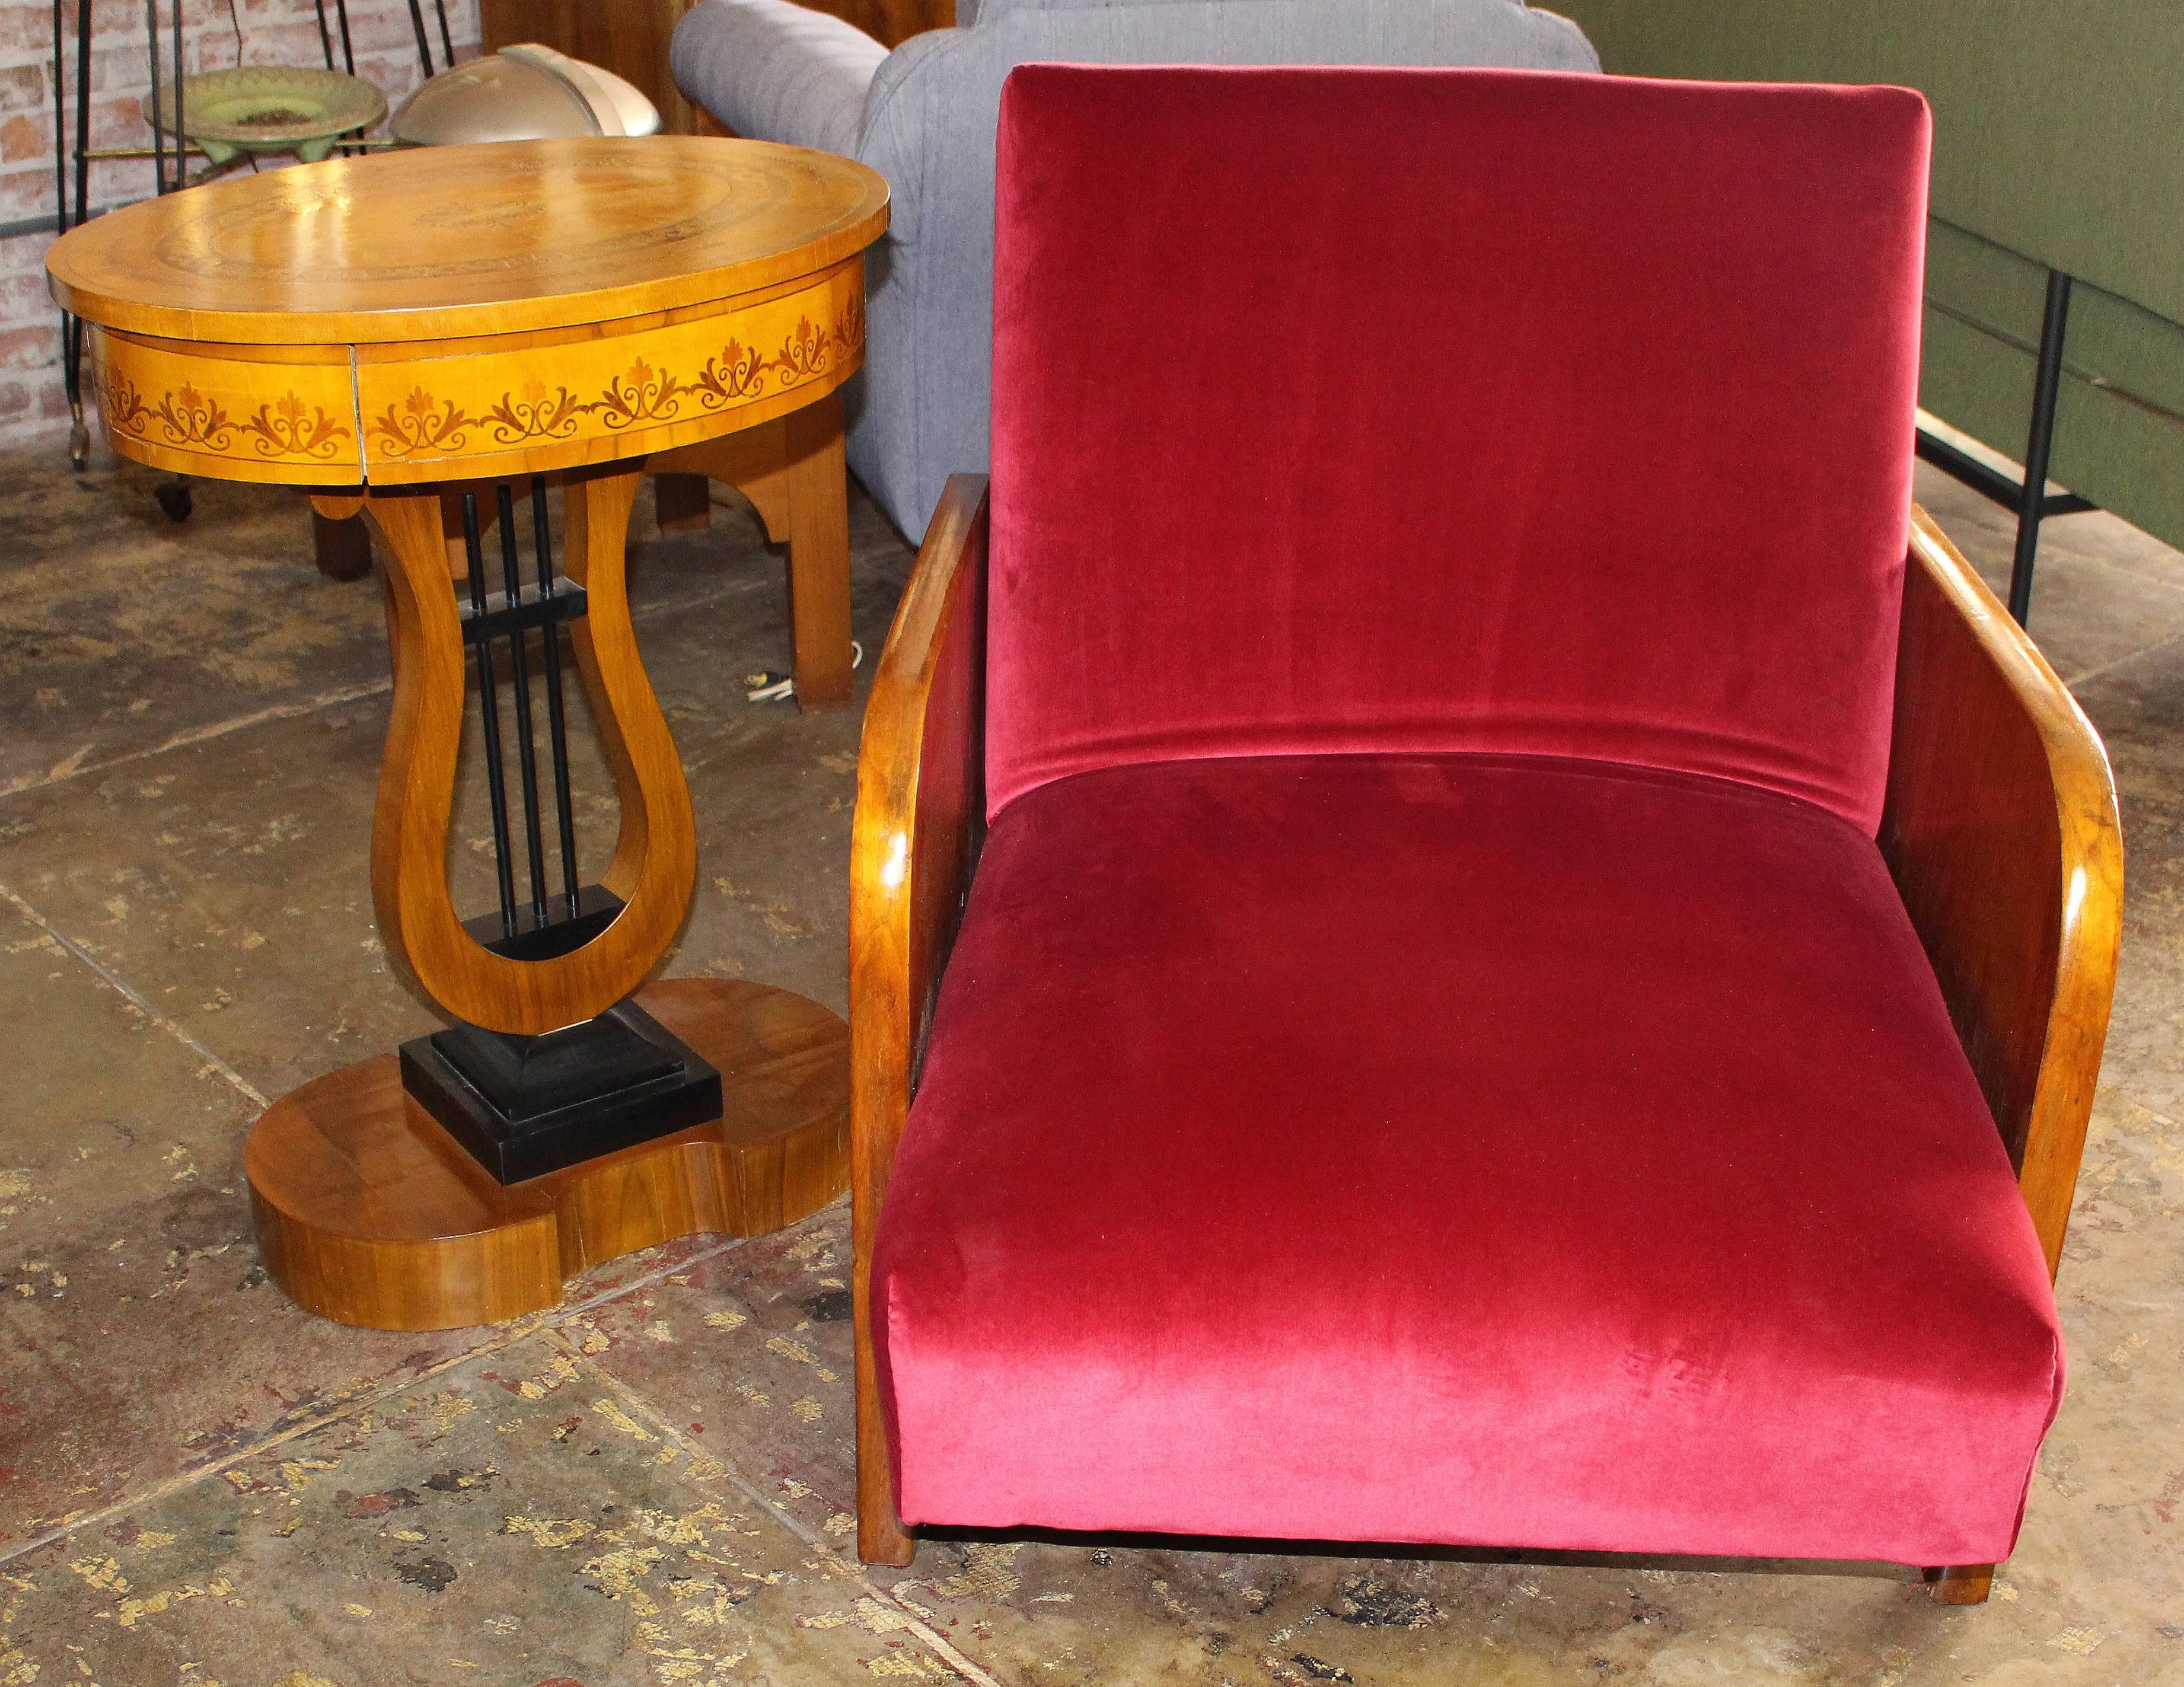 Art Deco sleeper chair just reupholstered in burgundy cotton velvet.
Walnut base and veneer, extended as a bed 74 inches.
Pls note: Item is located in Beverly Store
7274 Beverly Blvd 
Los Angeles, CA 90036
